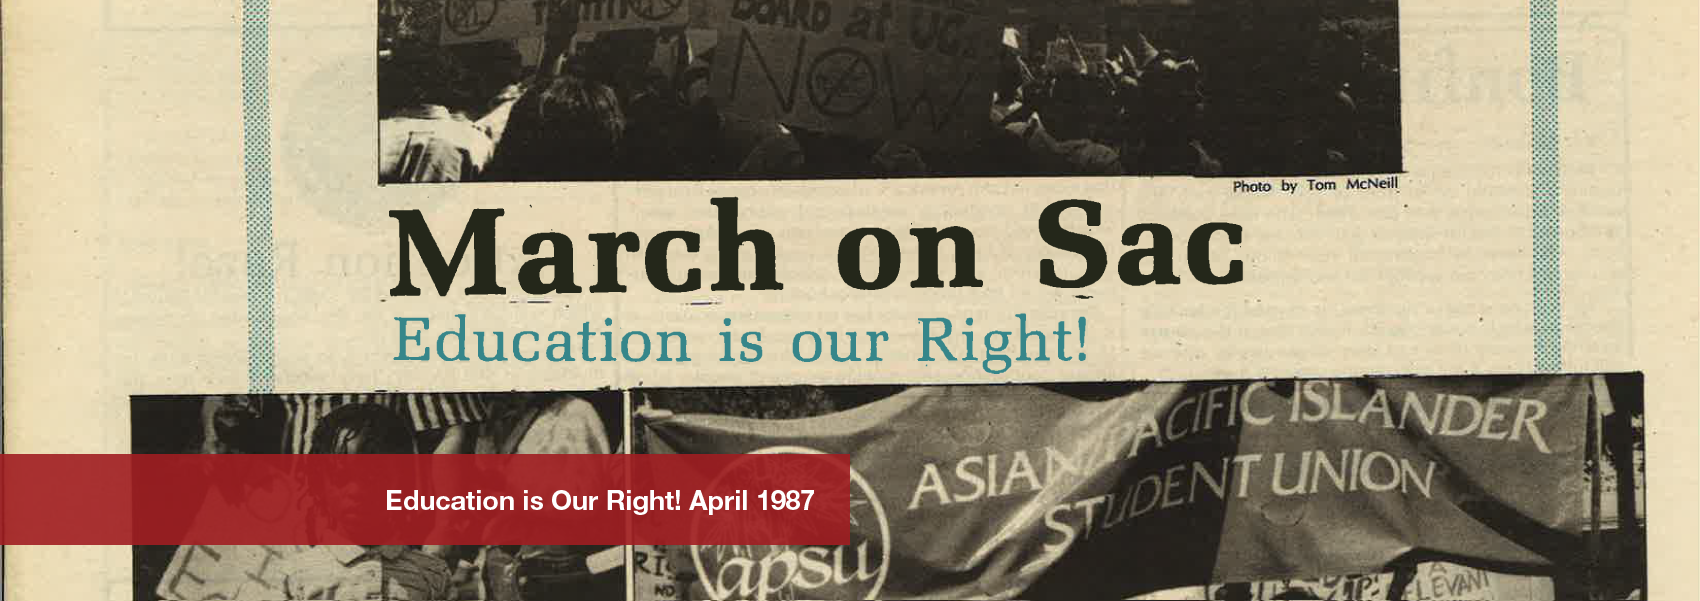 march on sac